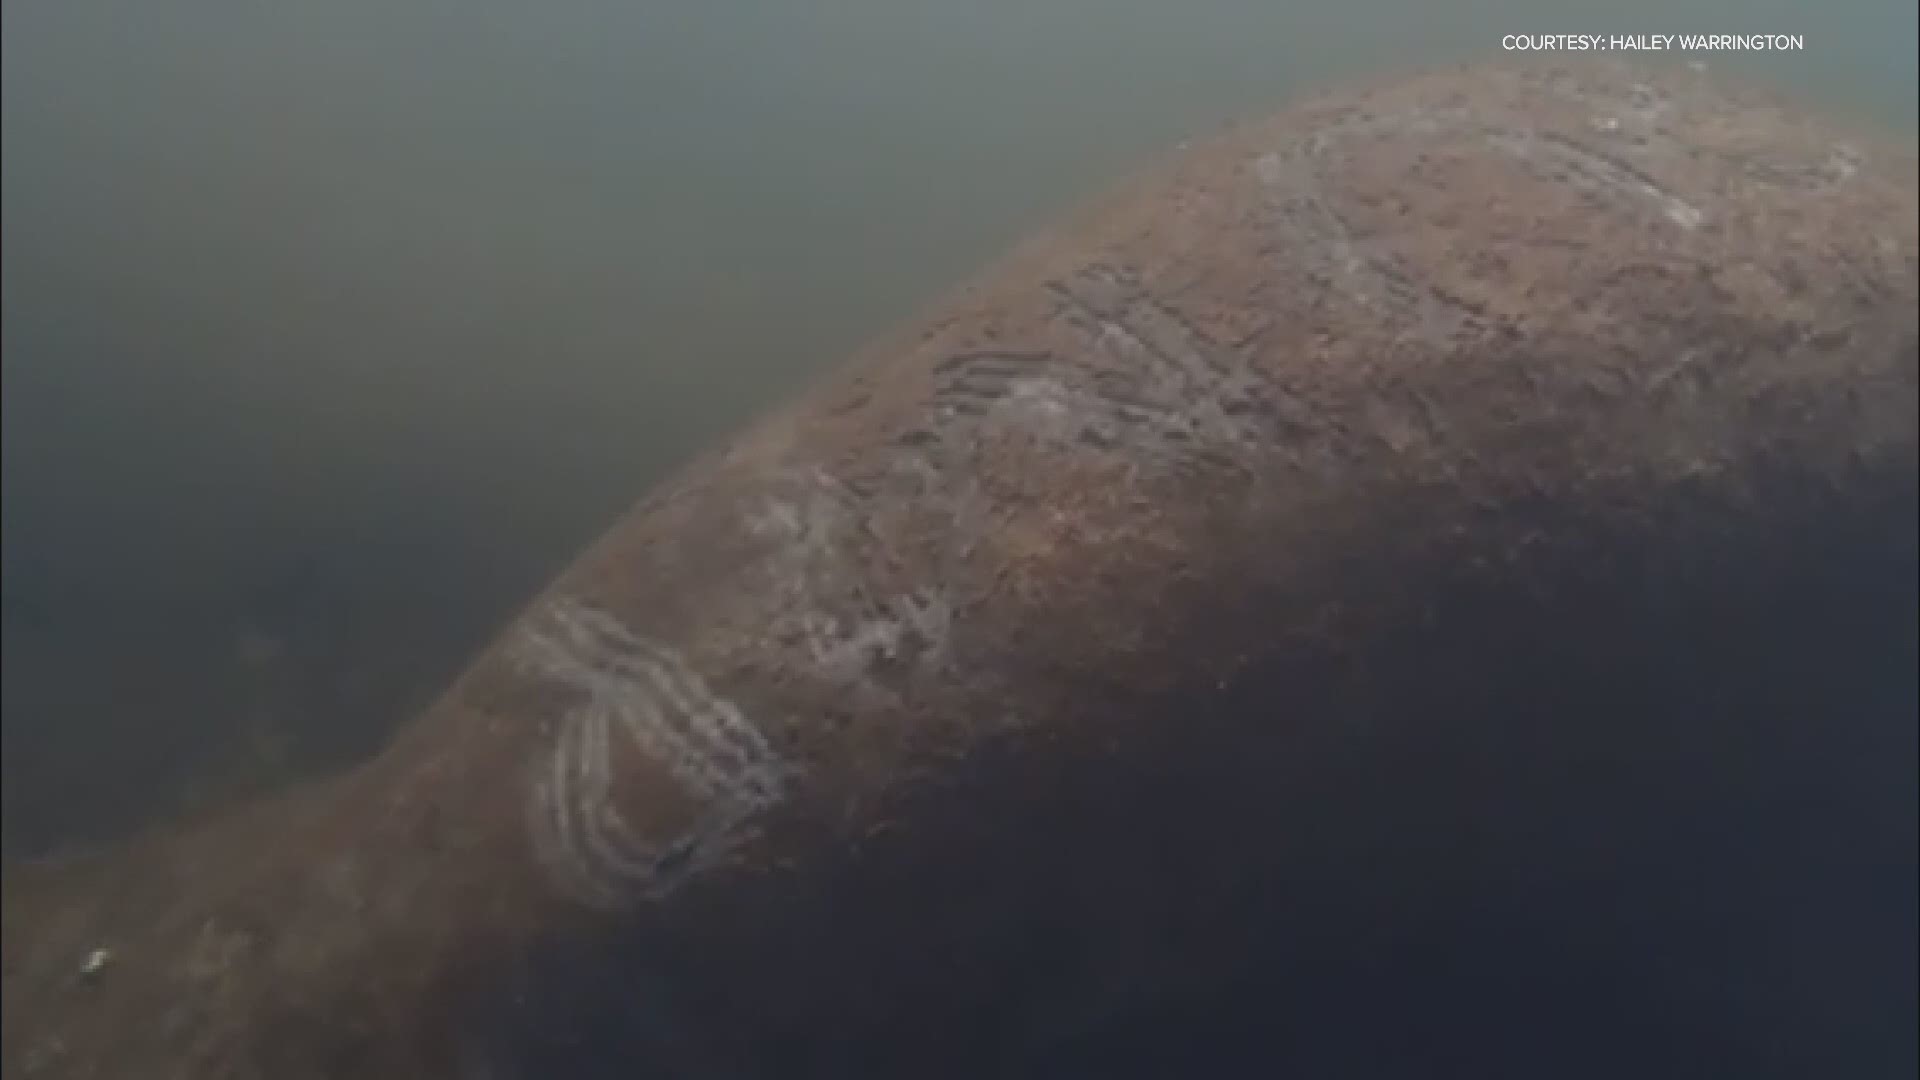 Federal authorities are investigating who marked "Trump" onto the back of a manatee.